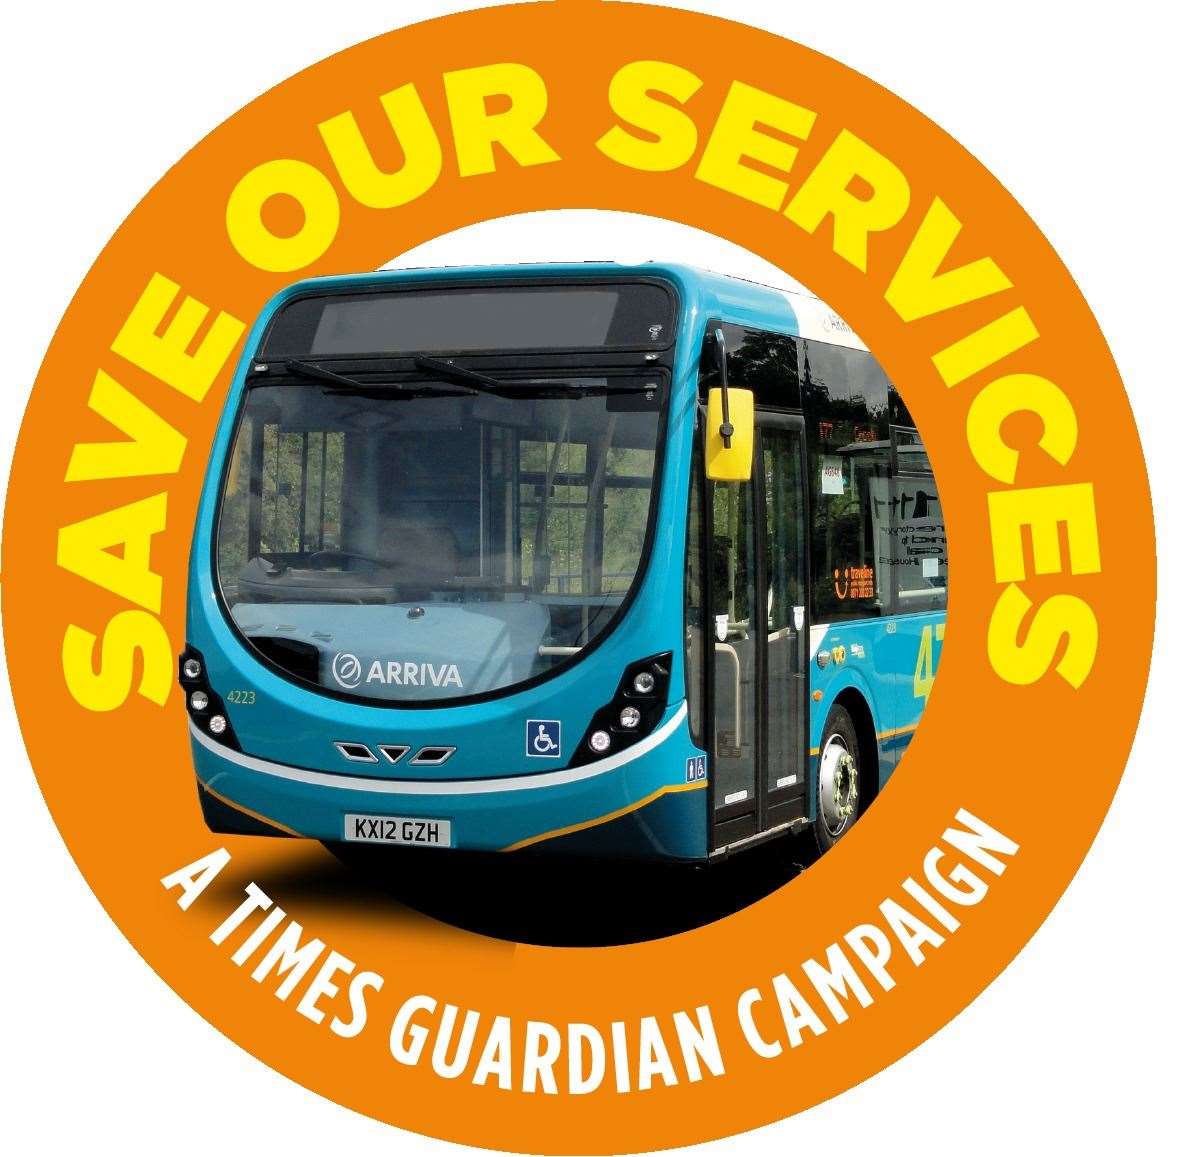 The Times Guardian will be campaigning to Save our Services